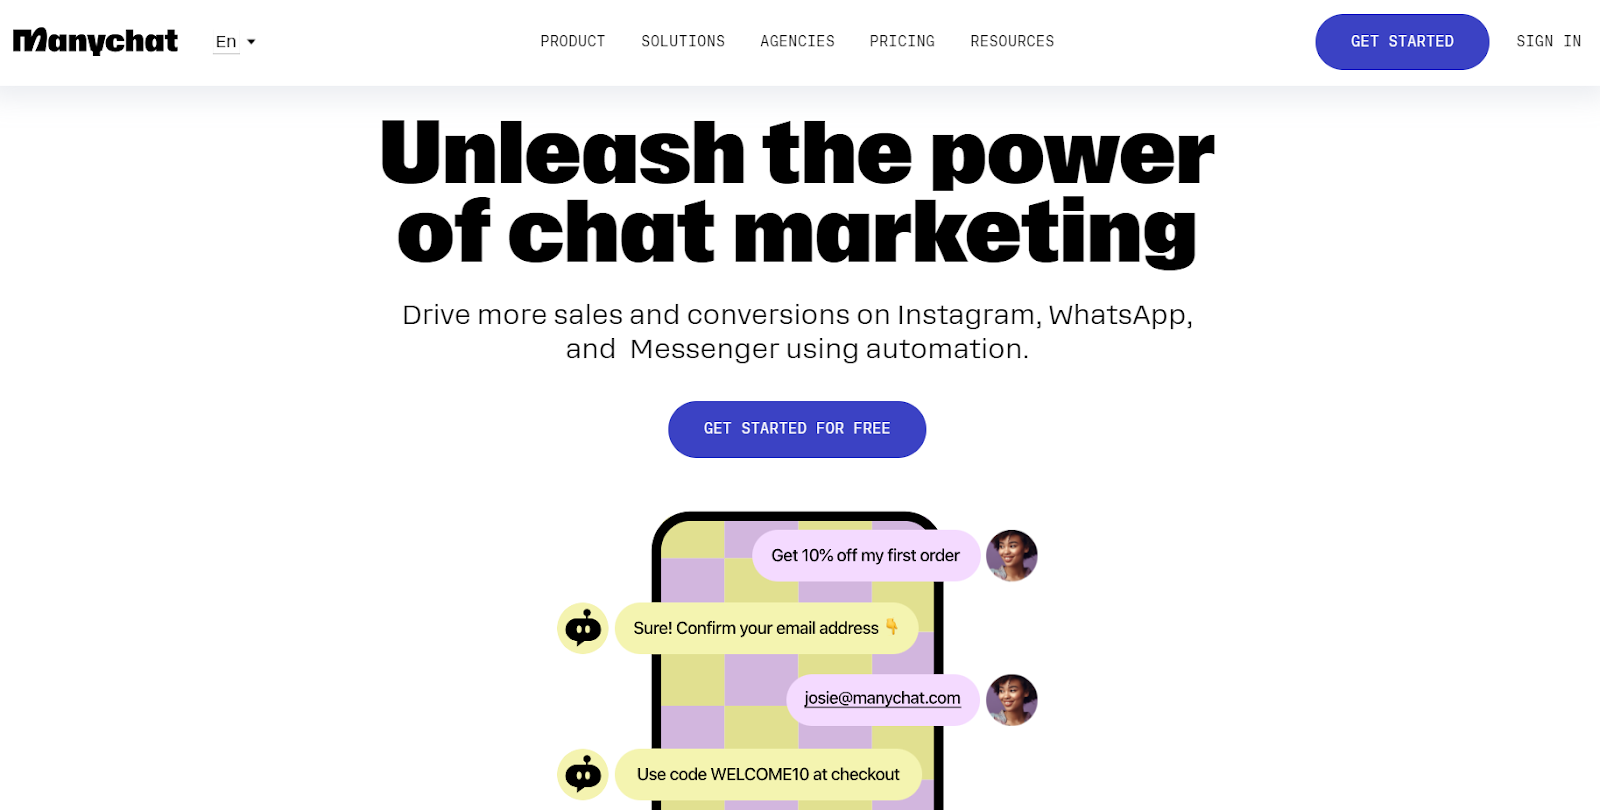 manychat website - chat marketing made  easy